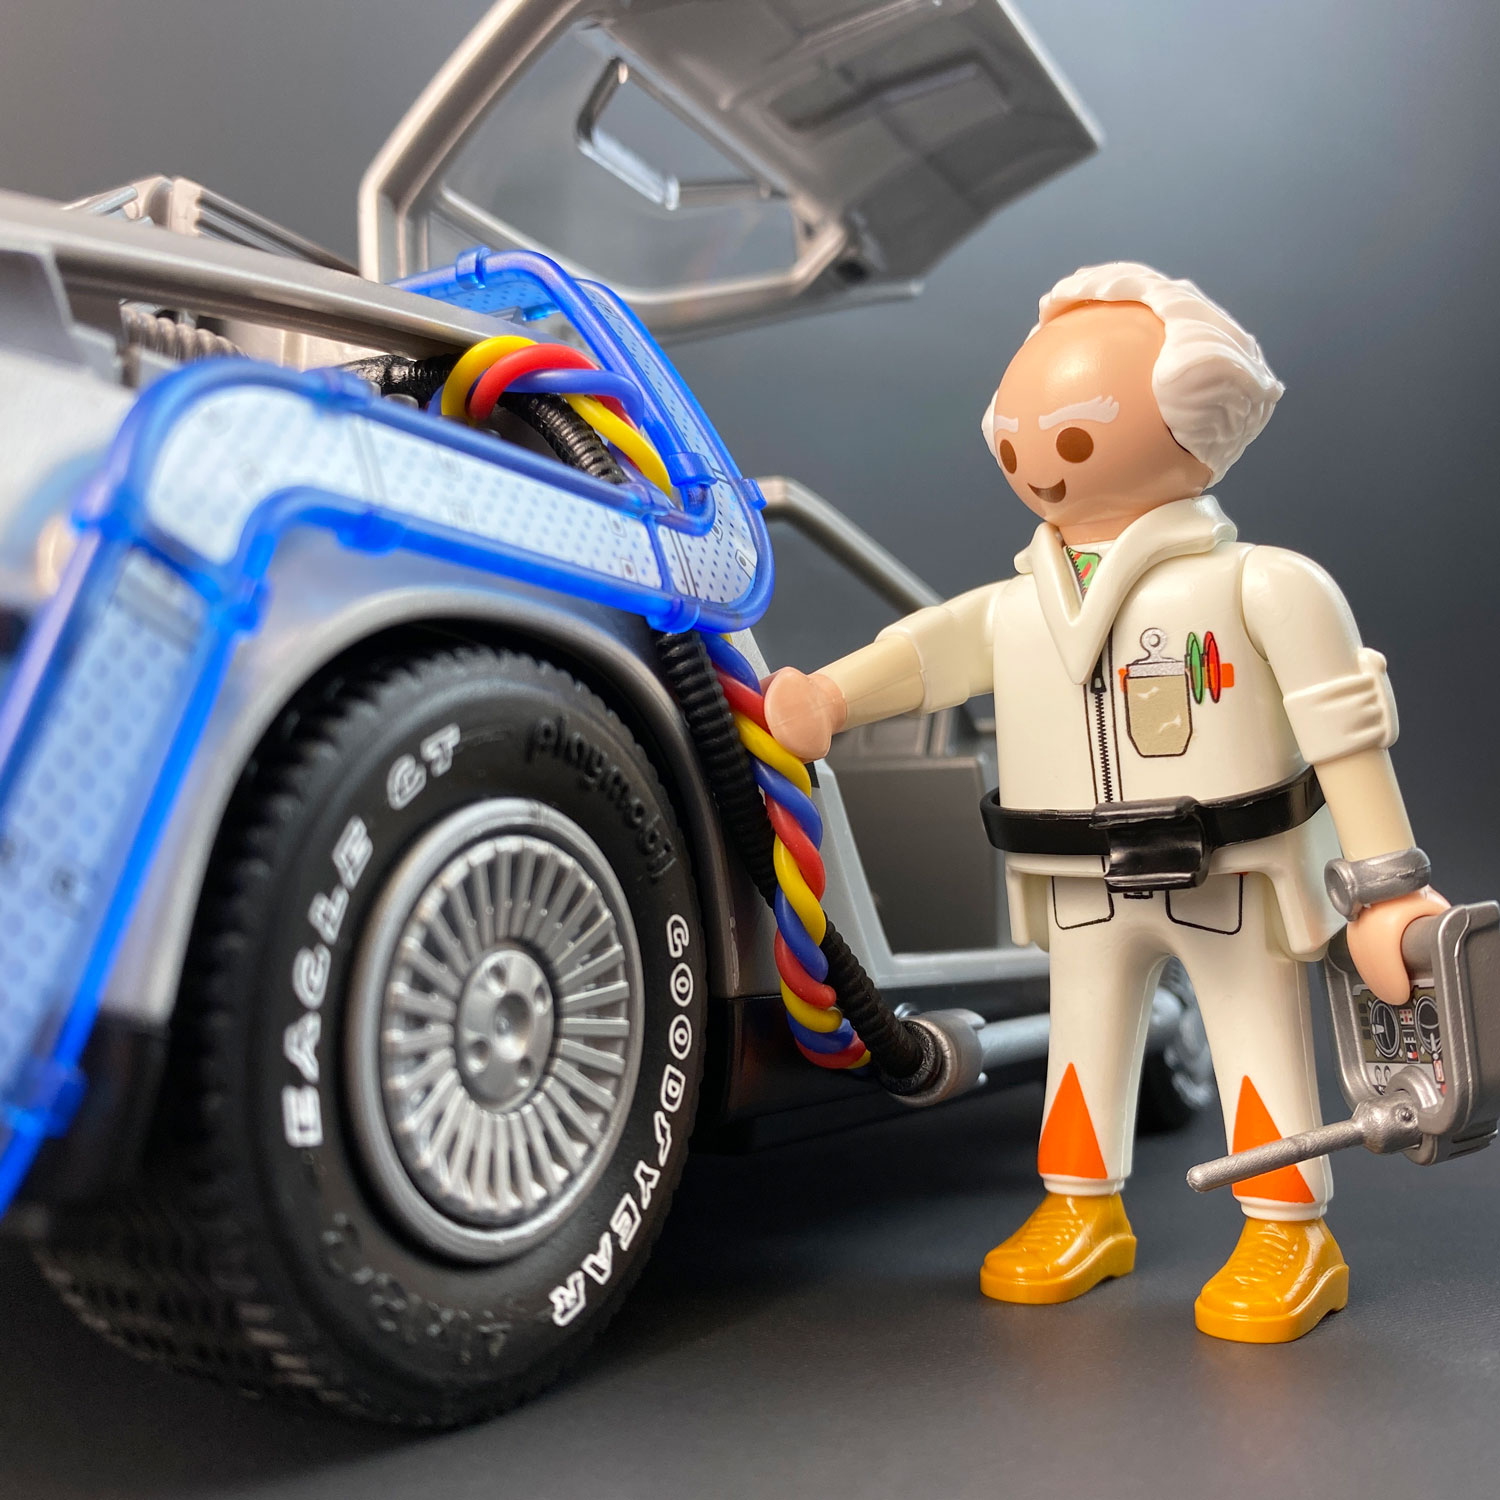 Playmobil DeLorean Flux Wires with model of Doc from Back to the Future